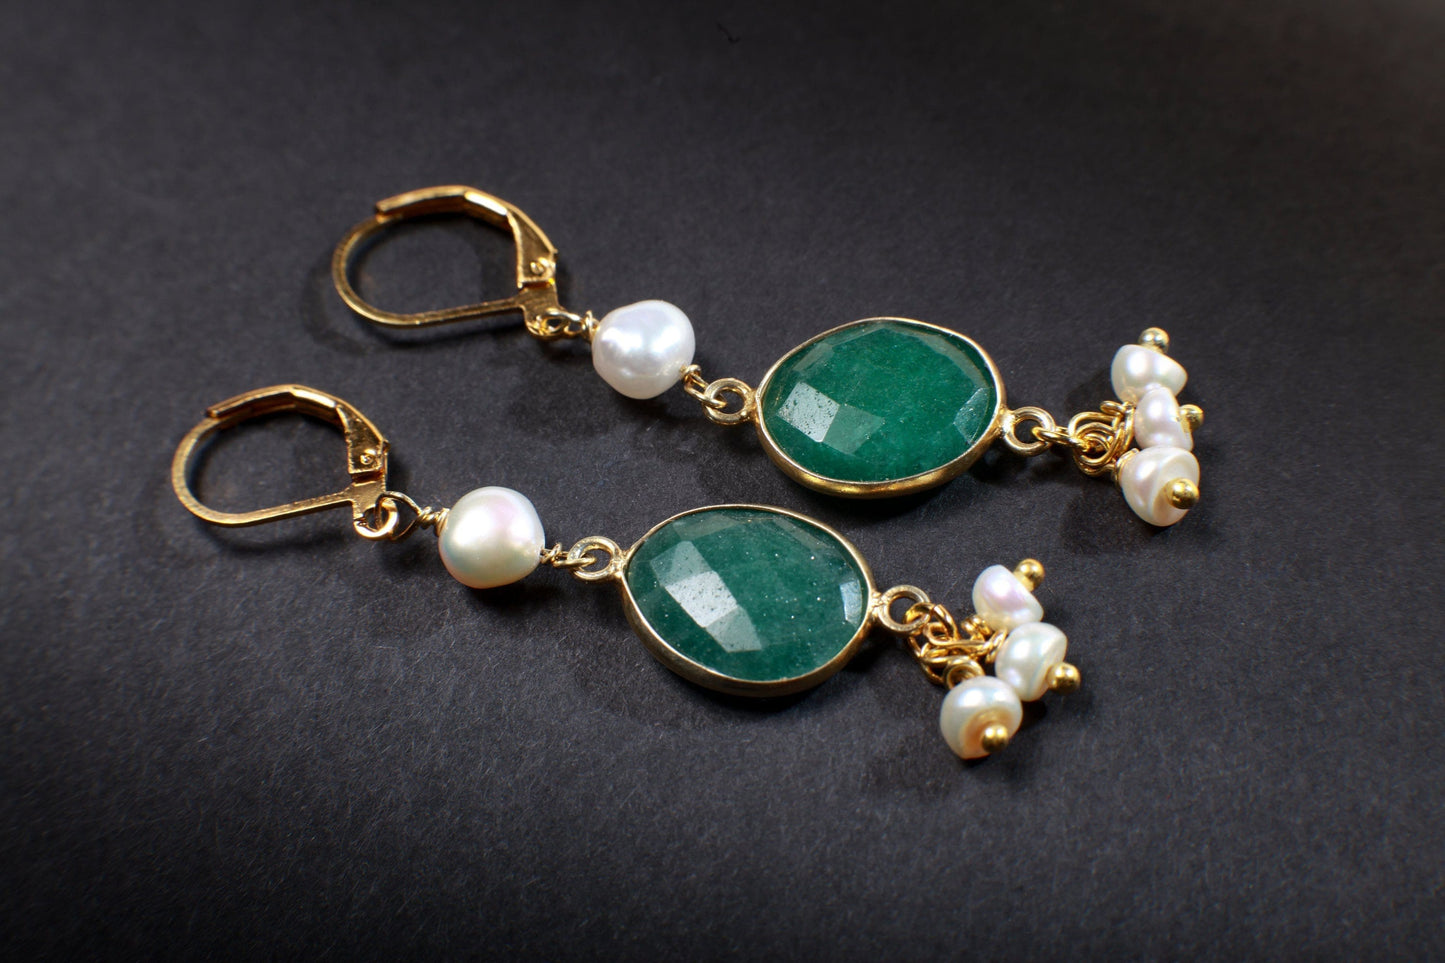 Emerald Earrings Free Form Gold Bezel with Fresh Water Pearl Clusters Earrings in Gold Ear Wire,Valentine, Bridesmaid, Handmade Gift for her